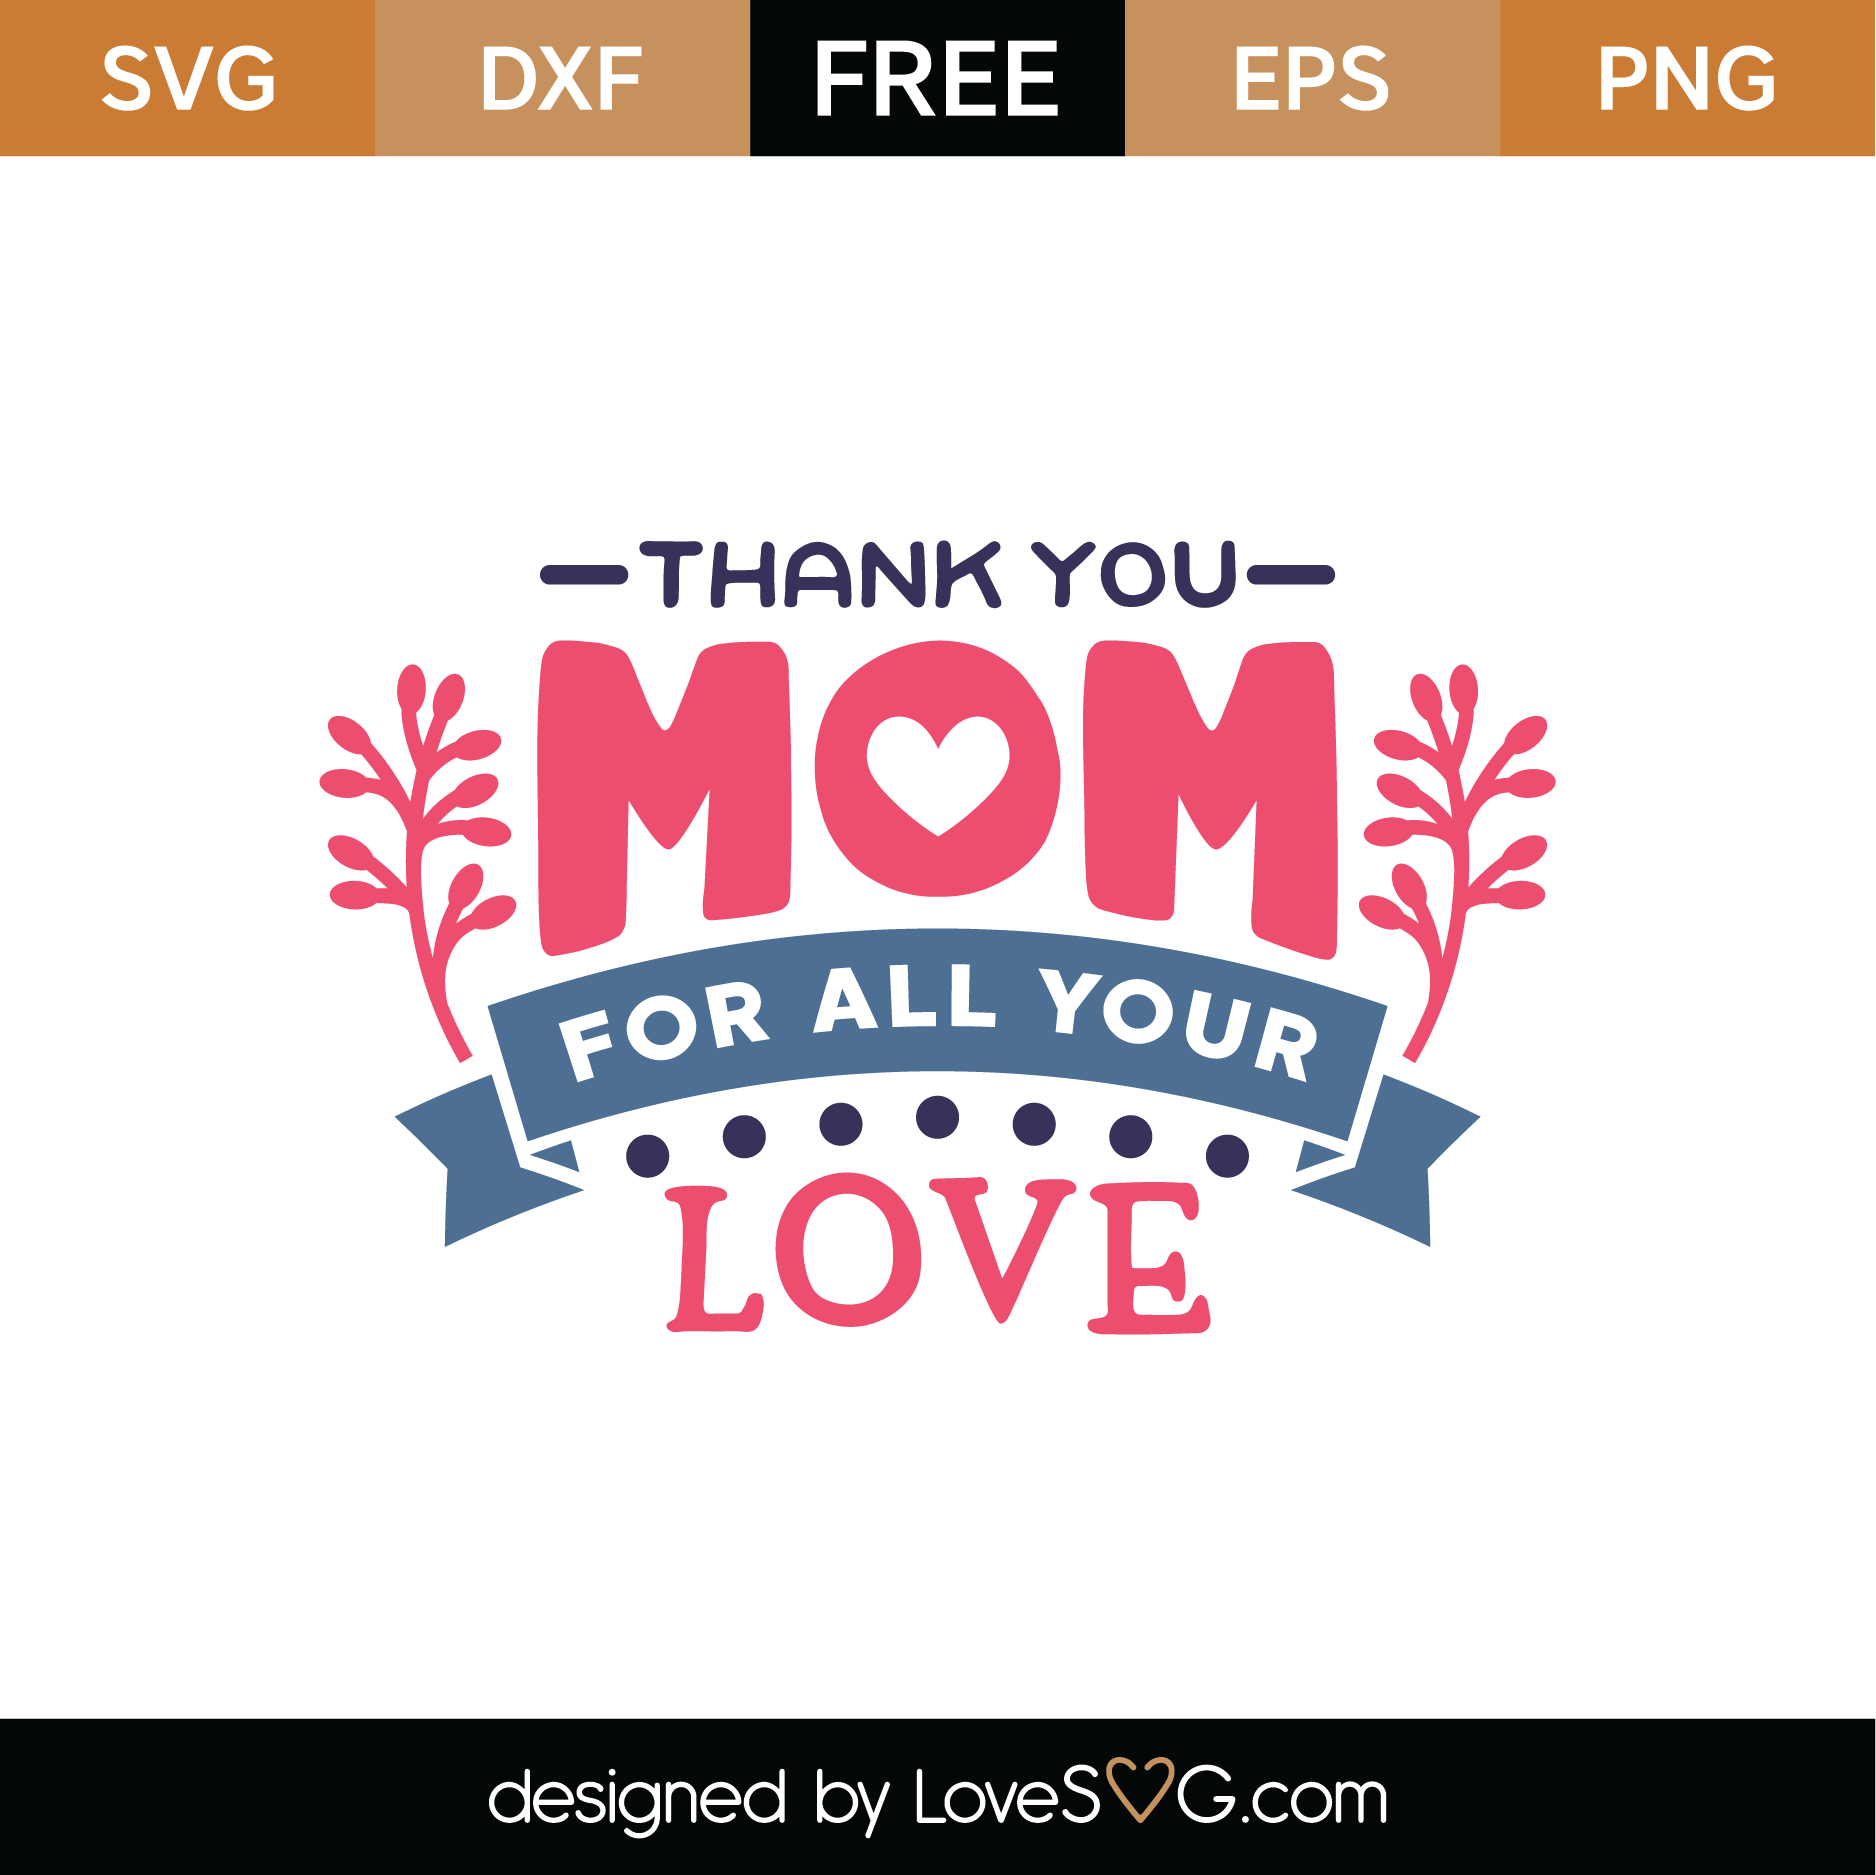 Download Free Thank You Mom For All Your Love SVG Cut File | Lovesvg.com